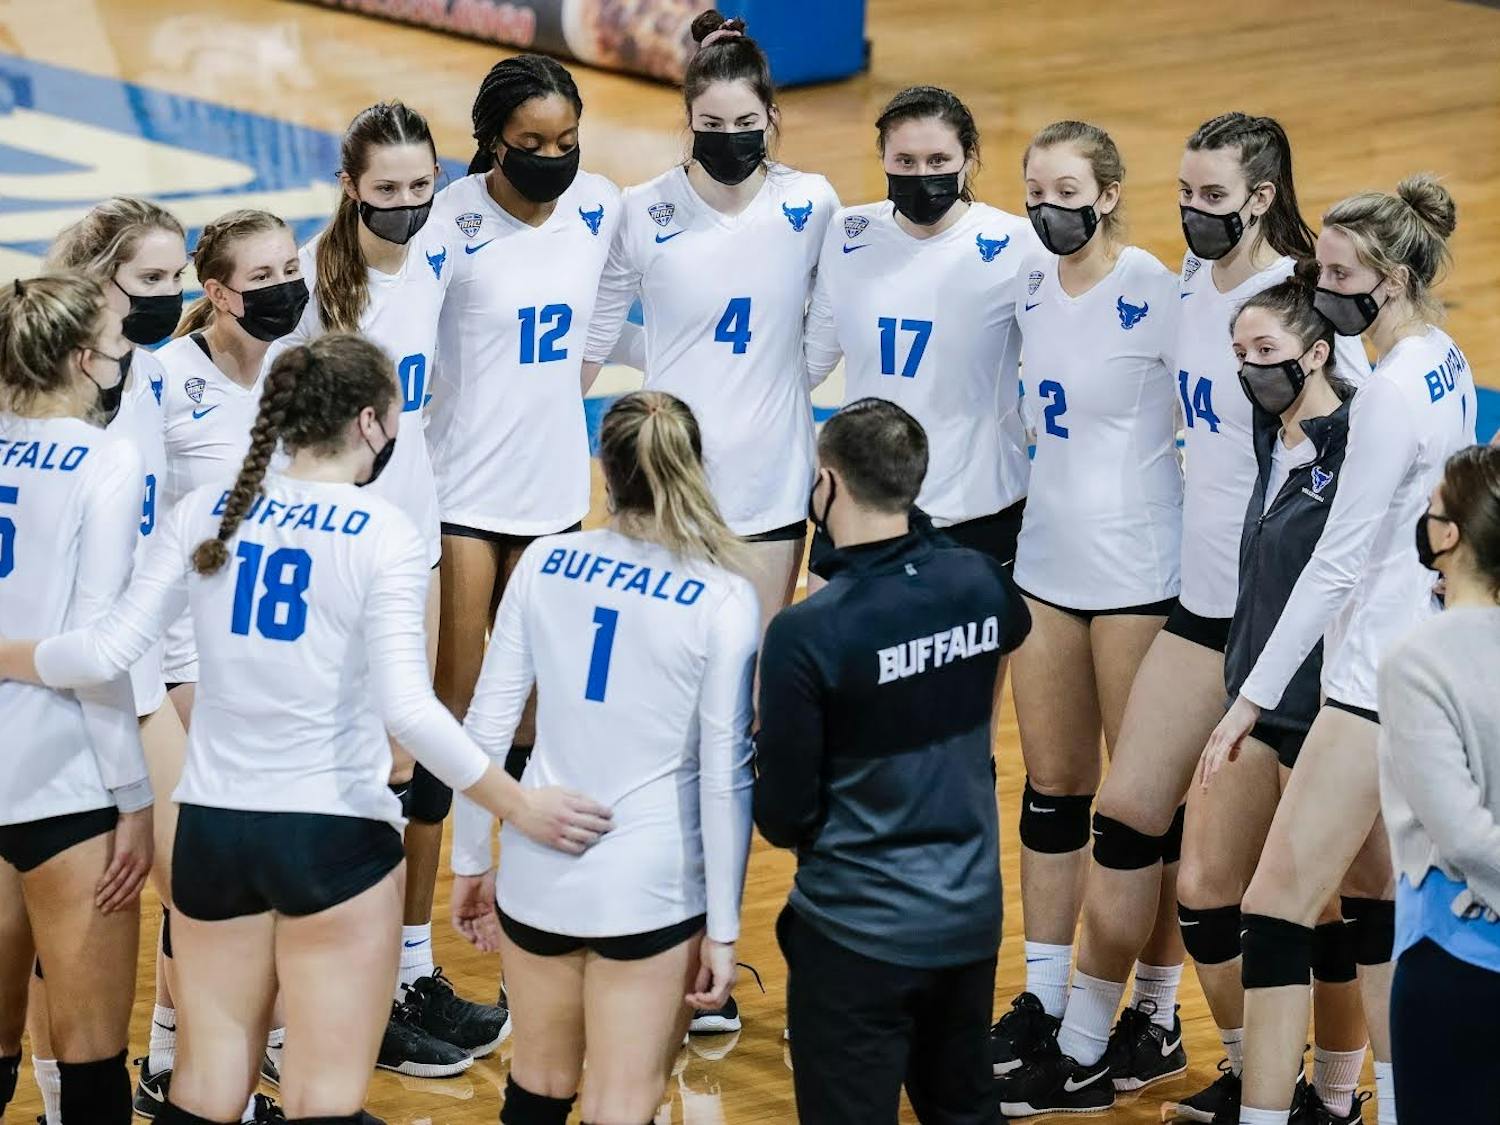 The UB women’s volleyball team (3-3) traveled to Tuscaloosa, AL for the Crimson Tide Invitational this weekend where they went 2-1, defeating Southern Mississippi and Troy but falling to Alabama.